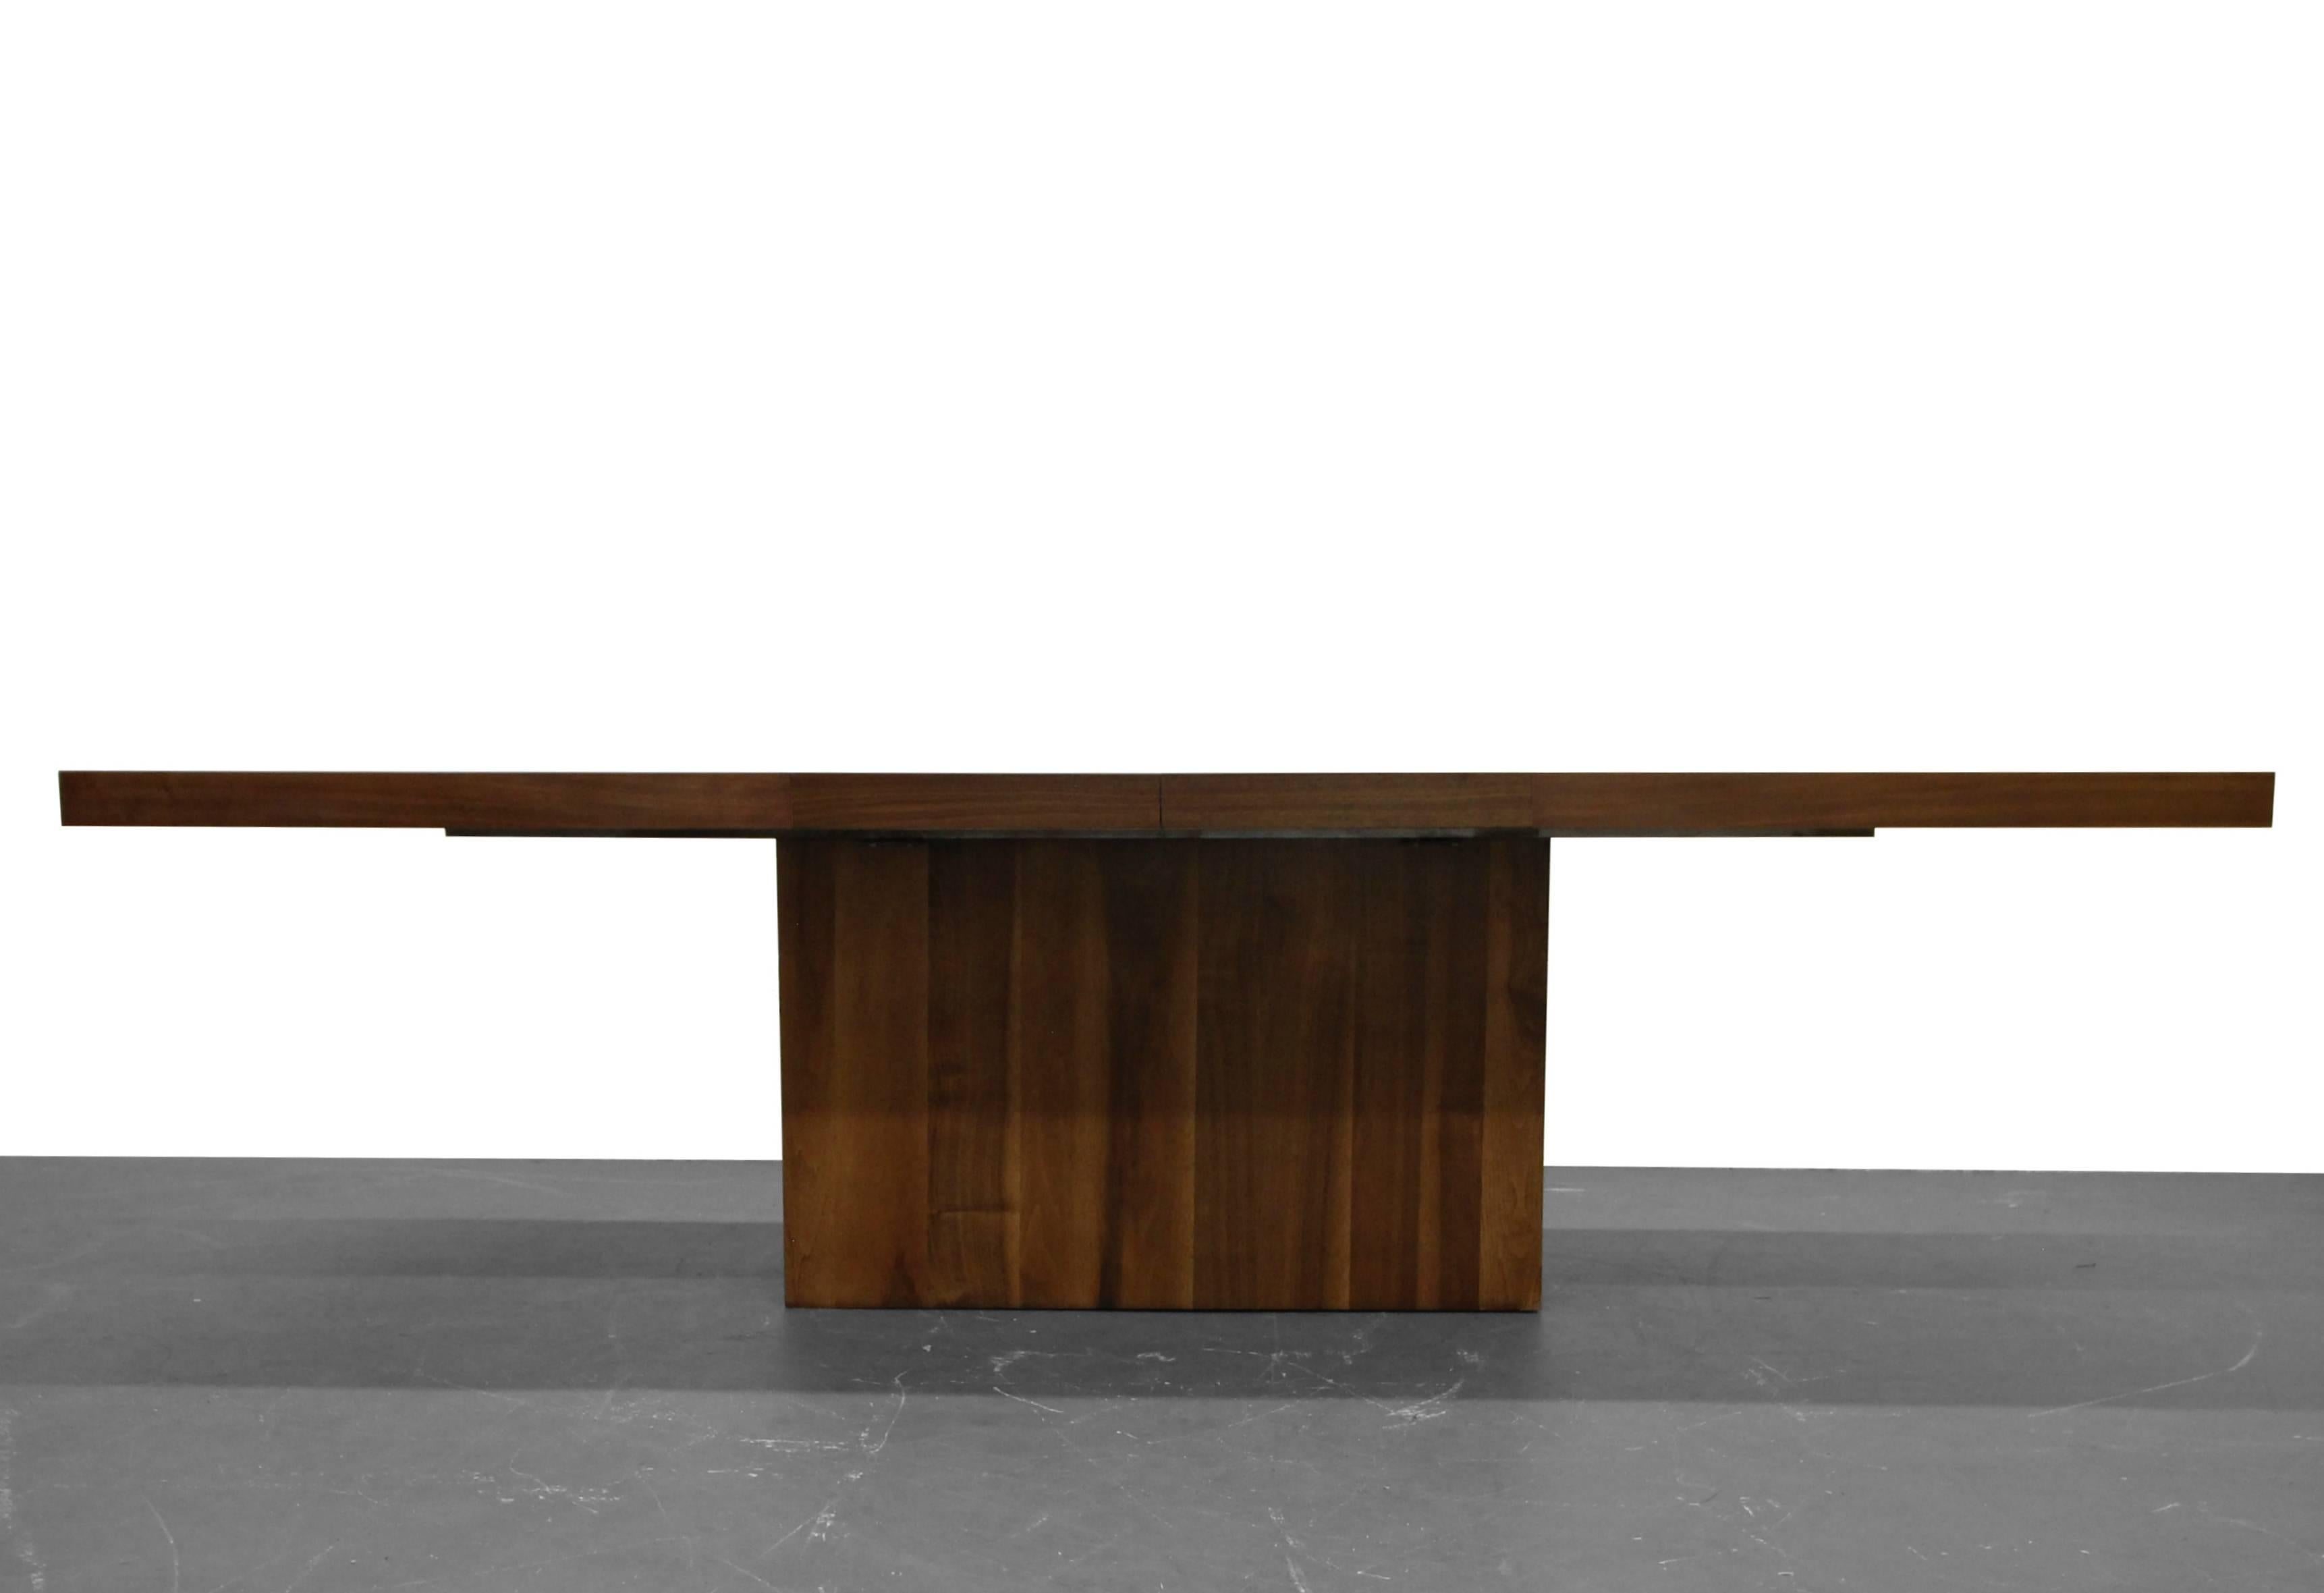 Stunning table. Walnut pedestal dining table by Milo Baughman for Thayer Coggin. Beautiful walnut top and matching walnut base. The perfect minimalist dining table. Lines don't get much cleaner.

Table measures 6ft closed, but extends to a massive